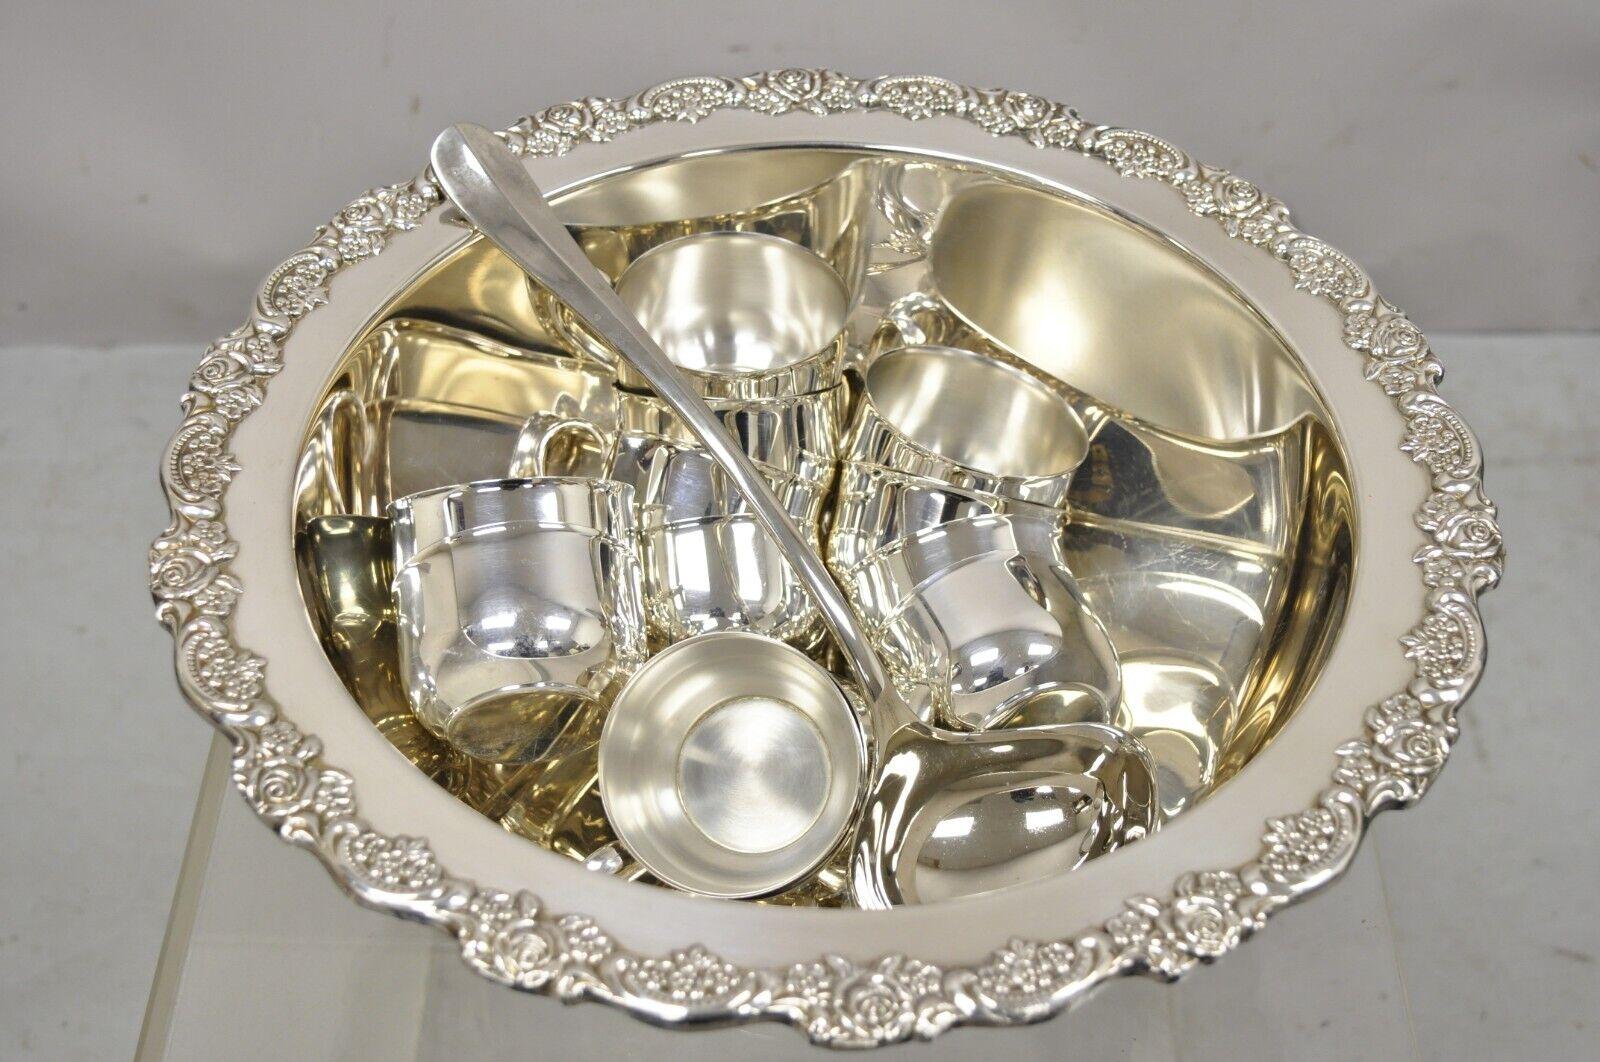 Oneida silver plated punch bowl set with 12 cups and ladle. Item features (12) cups, (1) punch bowl, (1) ladle. Circa Late 20th Century. Measurements: 7